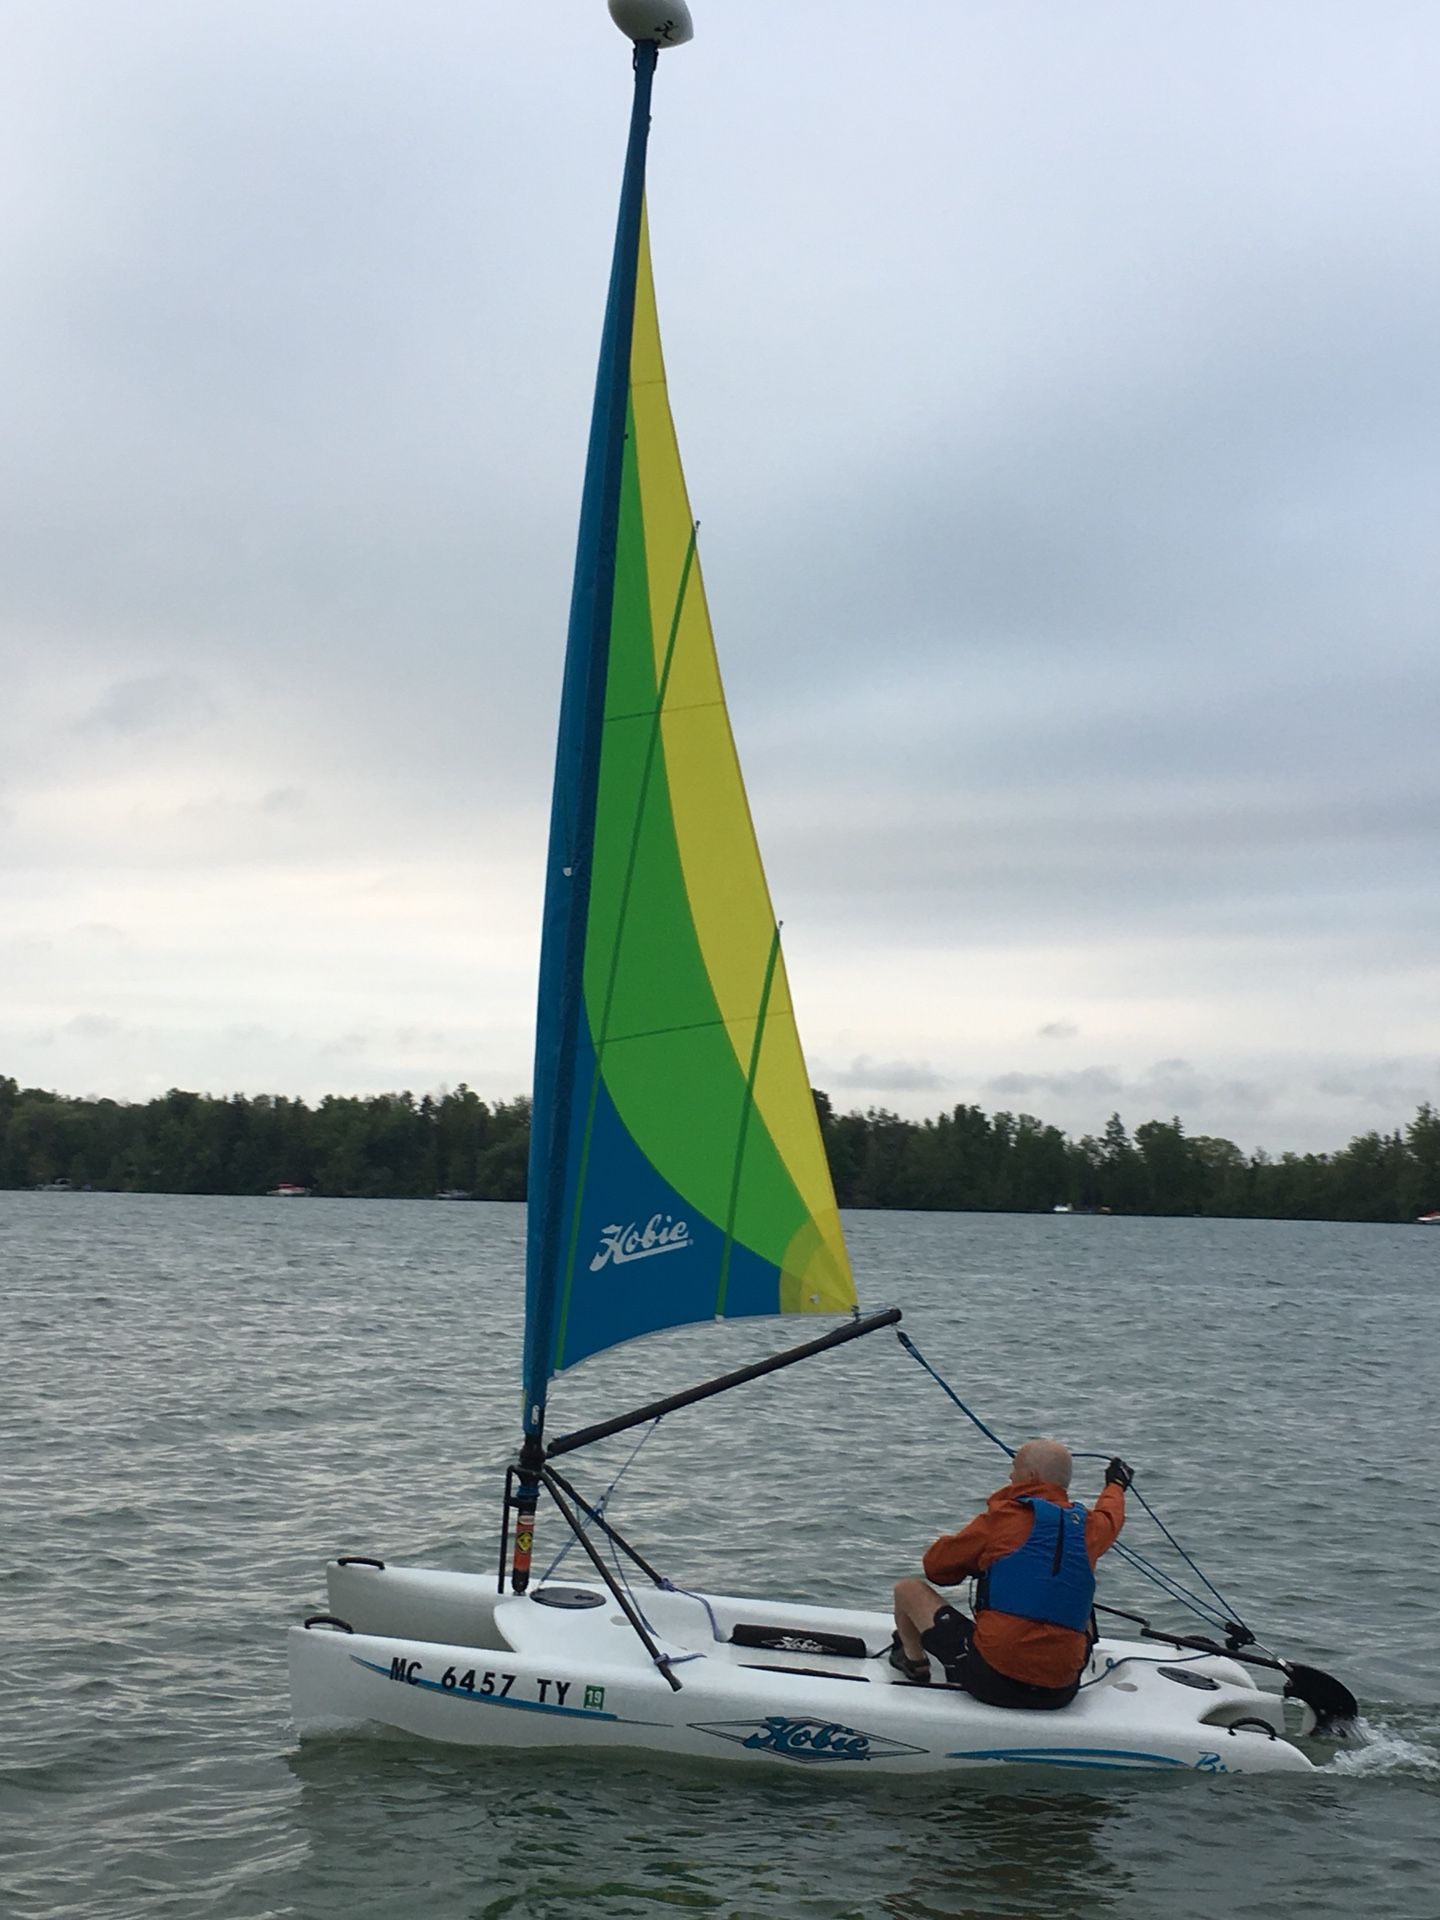 Hobie Cat Bravo Sailboat. 2015 12’ length in excellent condition! Includes the boom option!